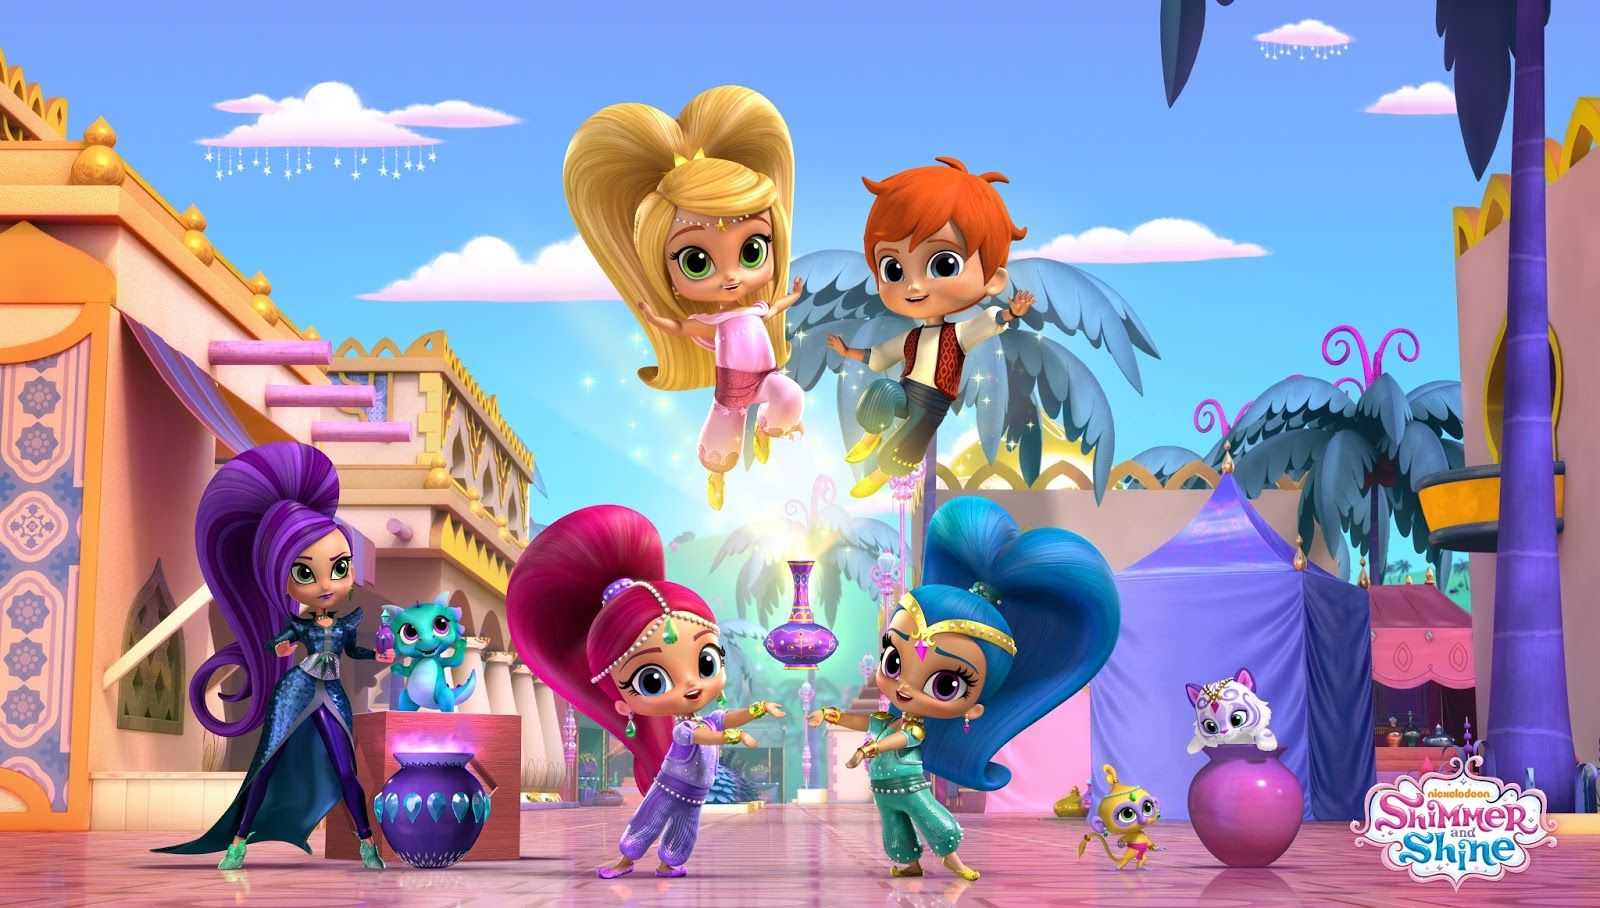 Best Shimmer and Shine PNG, Wallpaper, Clipart, Vector & GIF [2019]